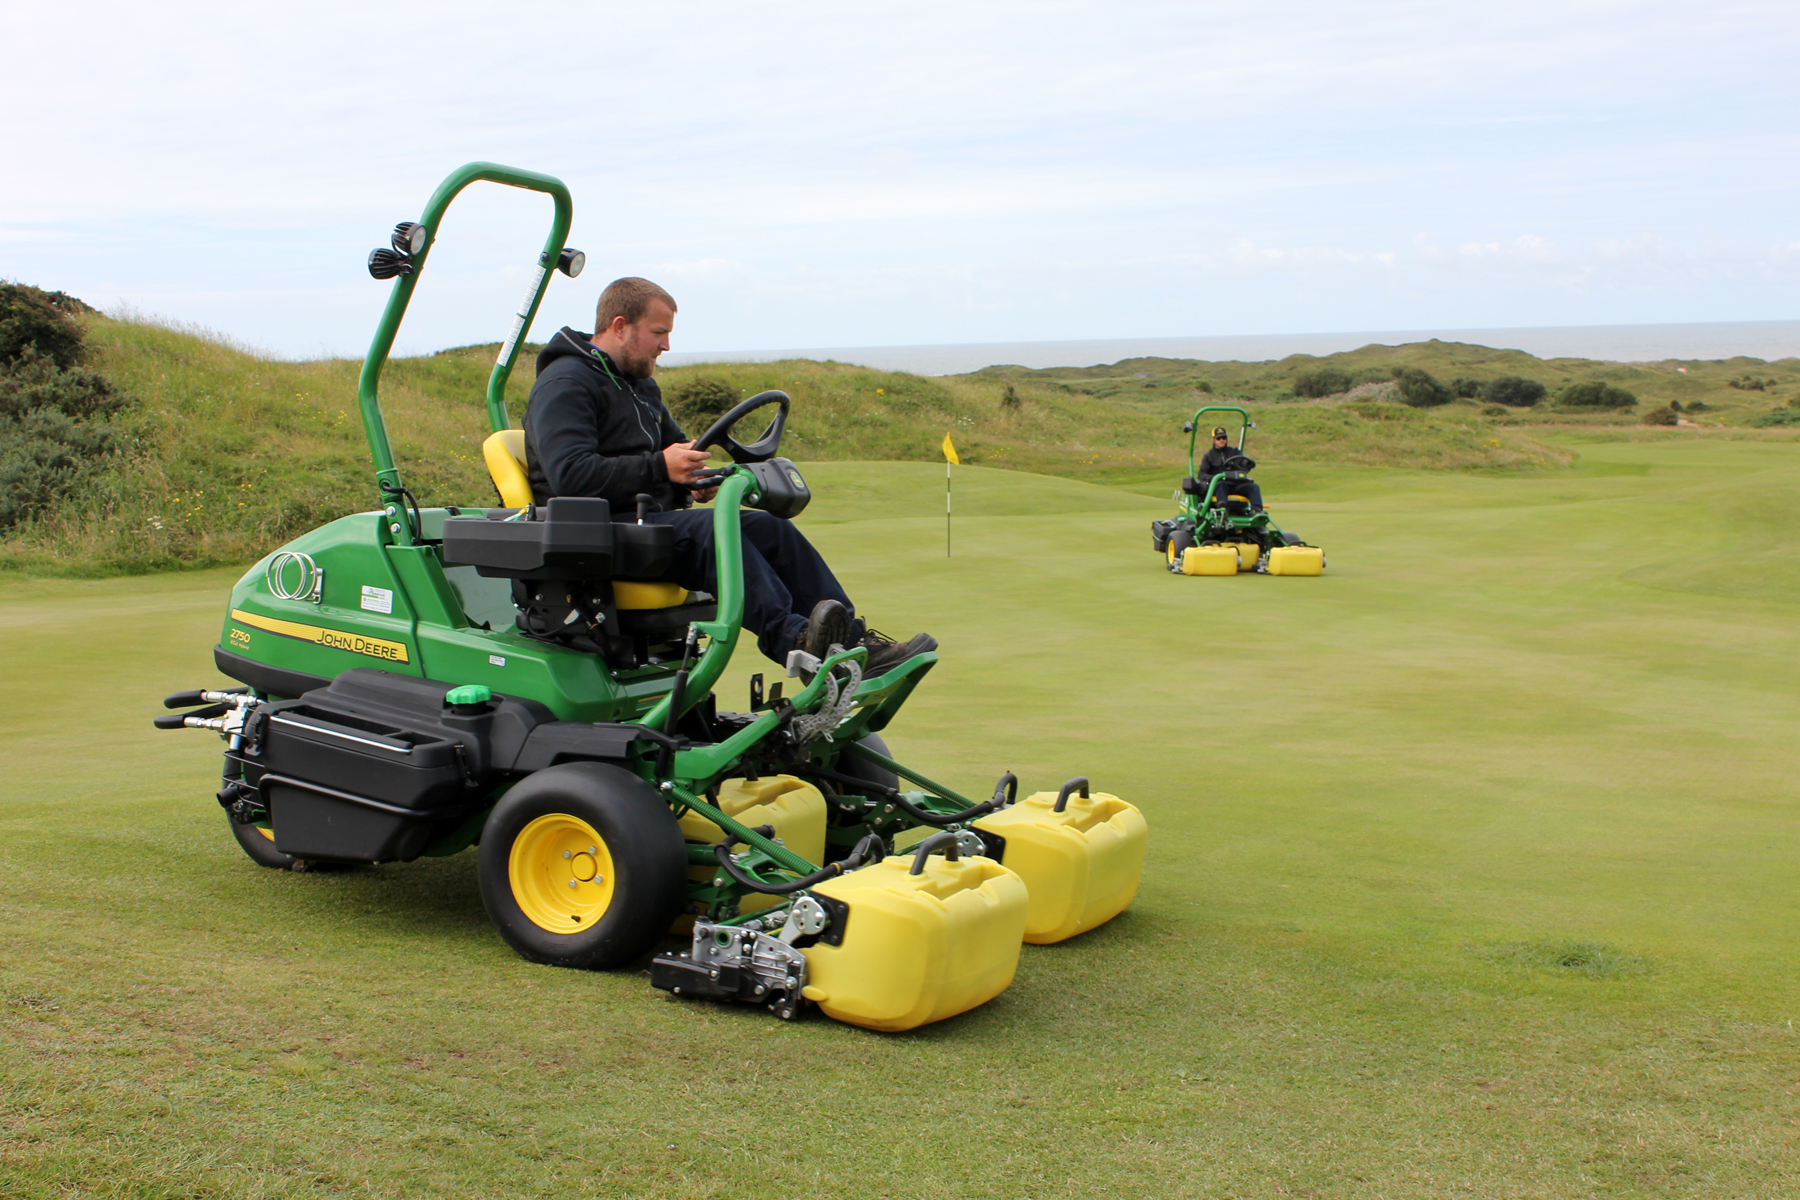 Simon Lacey and Stephen Lambert operating the new John Deere 2750E hybrid electric mowers on Pyle & Kenfig’s 14th green.